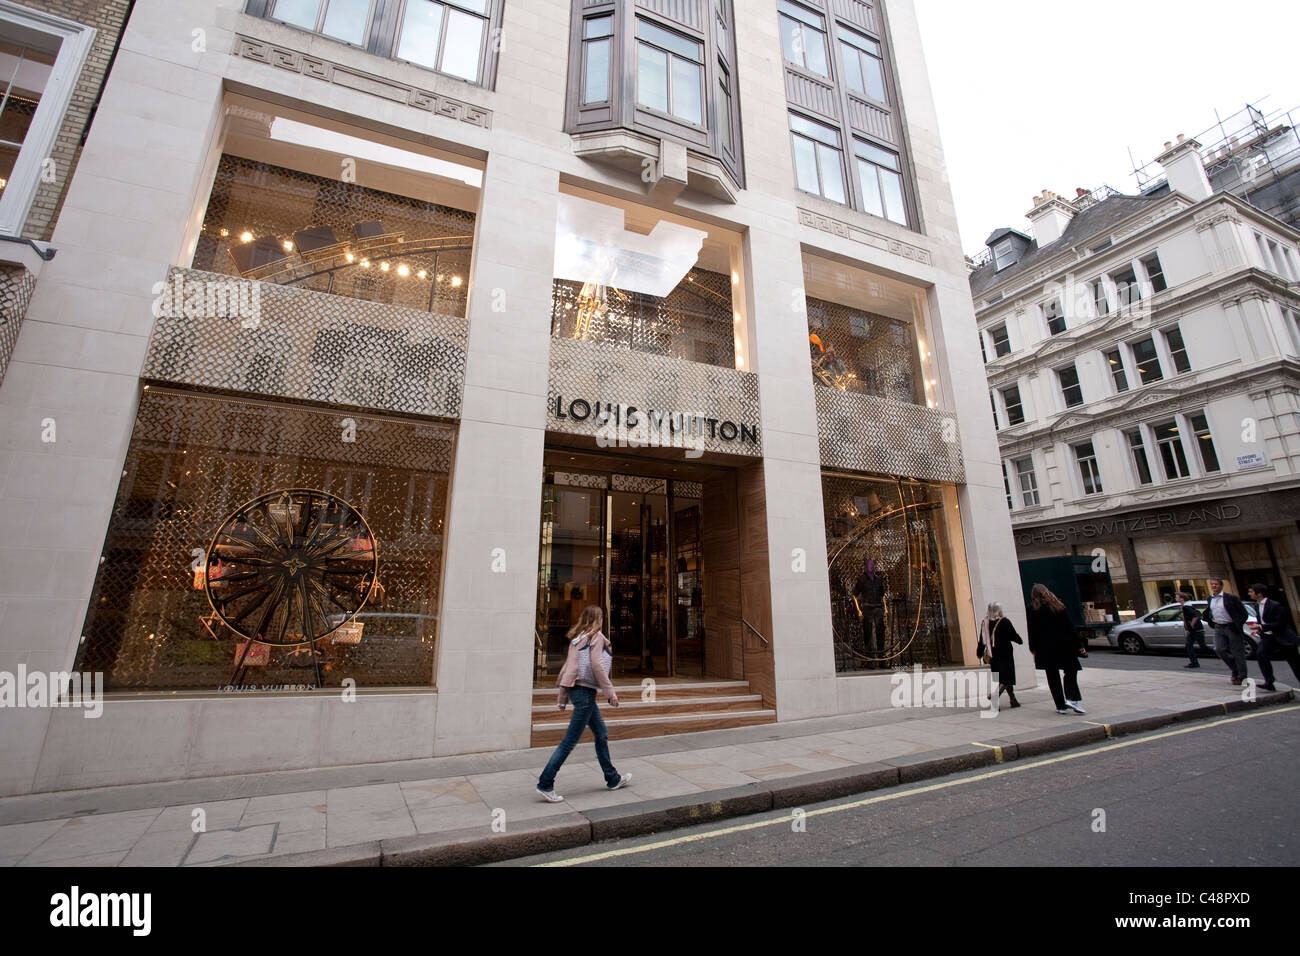 Louis Vuitton flagship store in Bond Street, Central London UK Stock Photo, Royalty Free Image ...